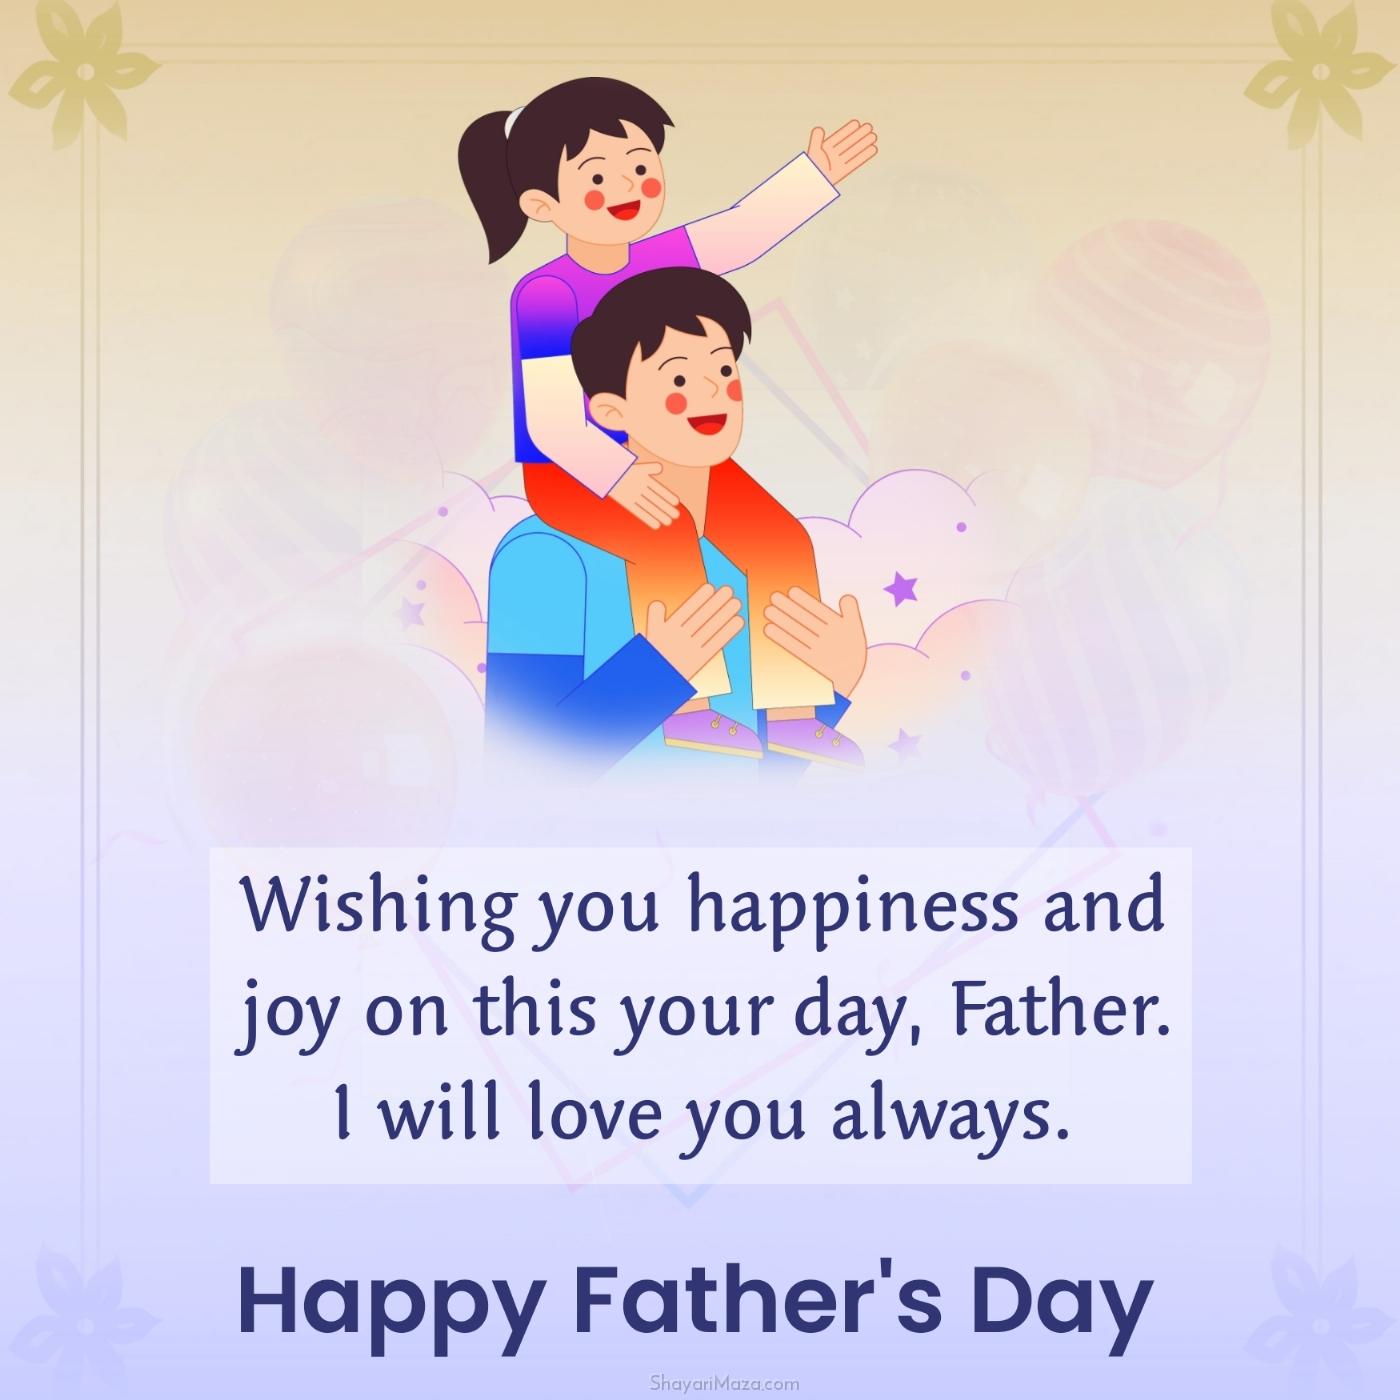 Wishing you happiness and joy on this your day Father